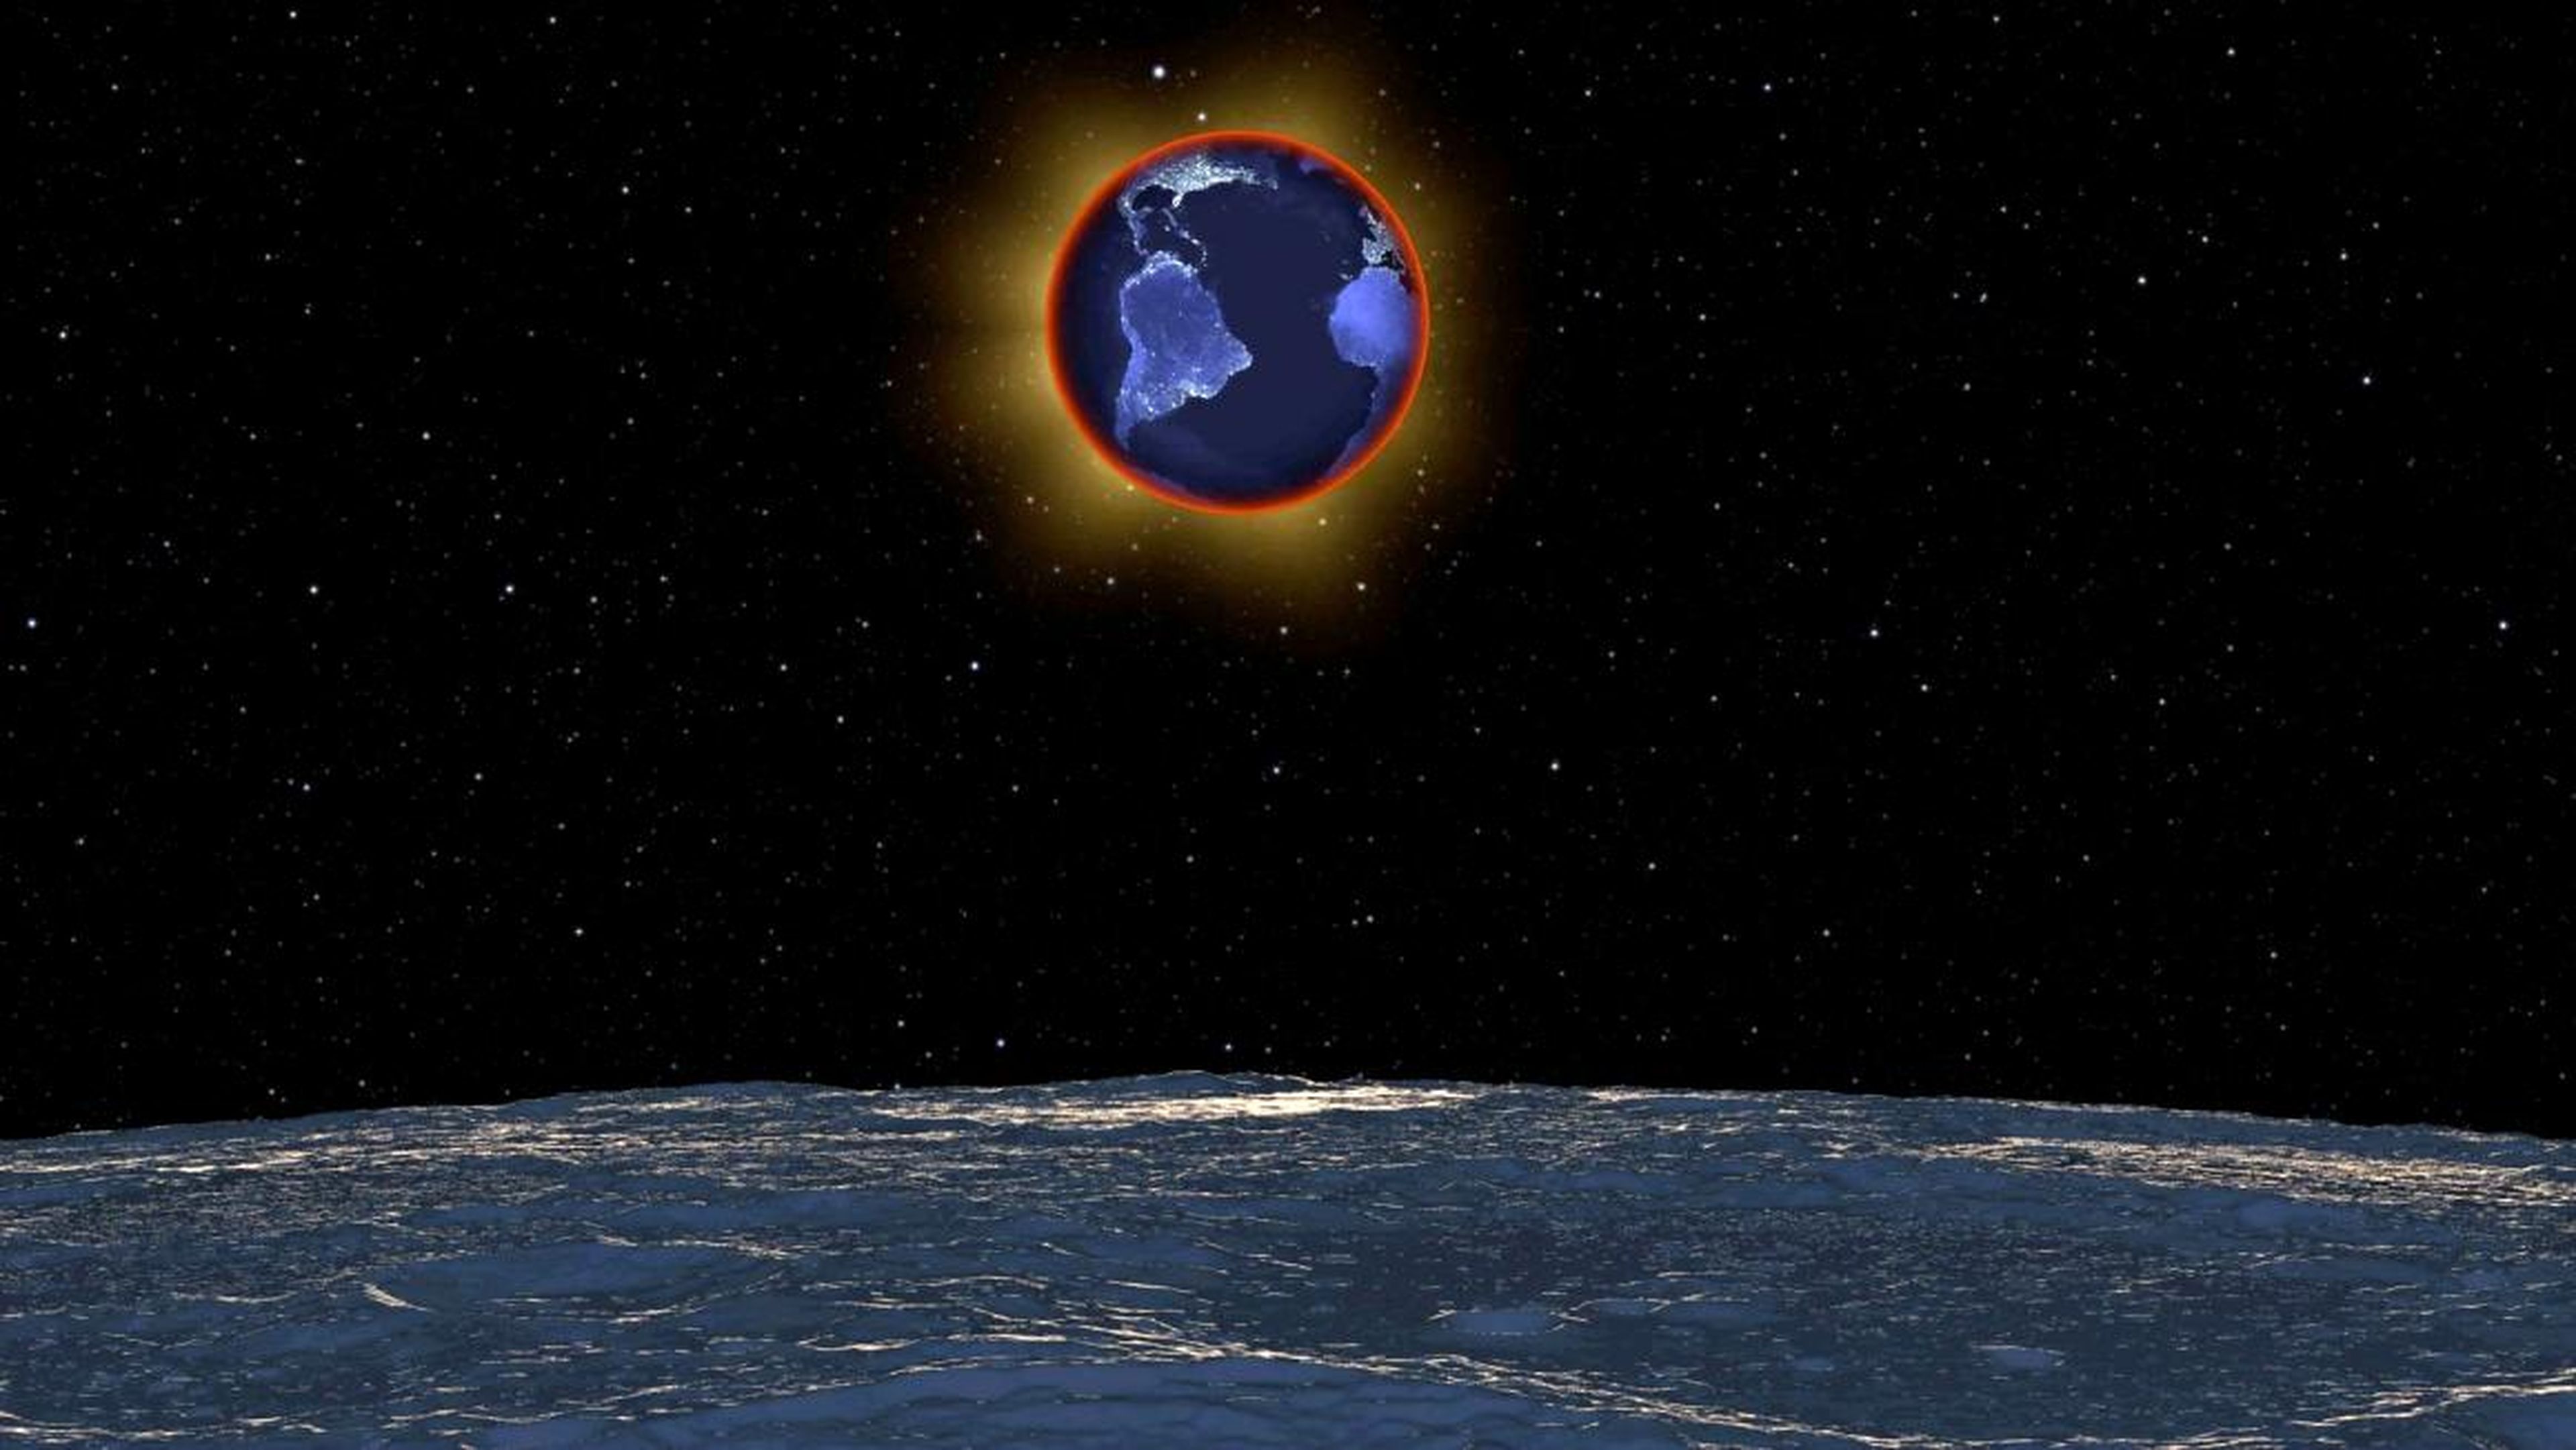 A simulated view of Earth from the moon during a total lunar eclipse.